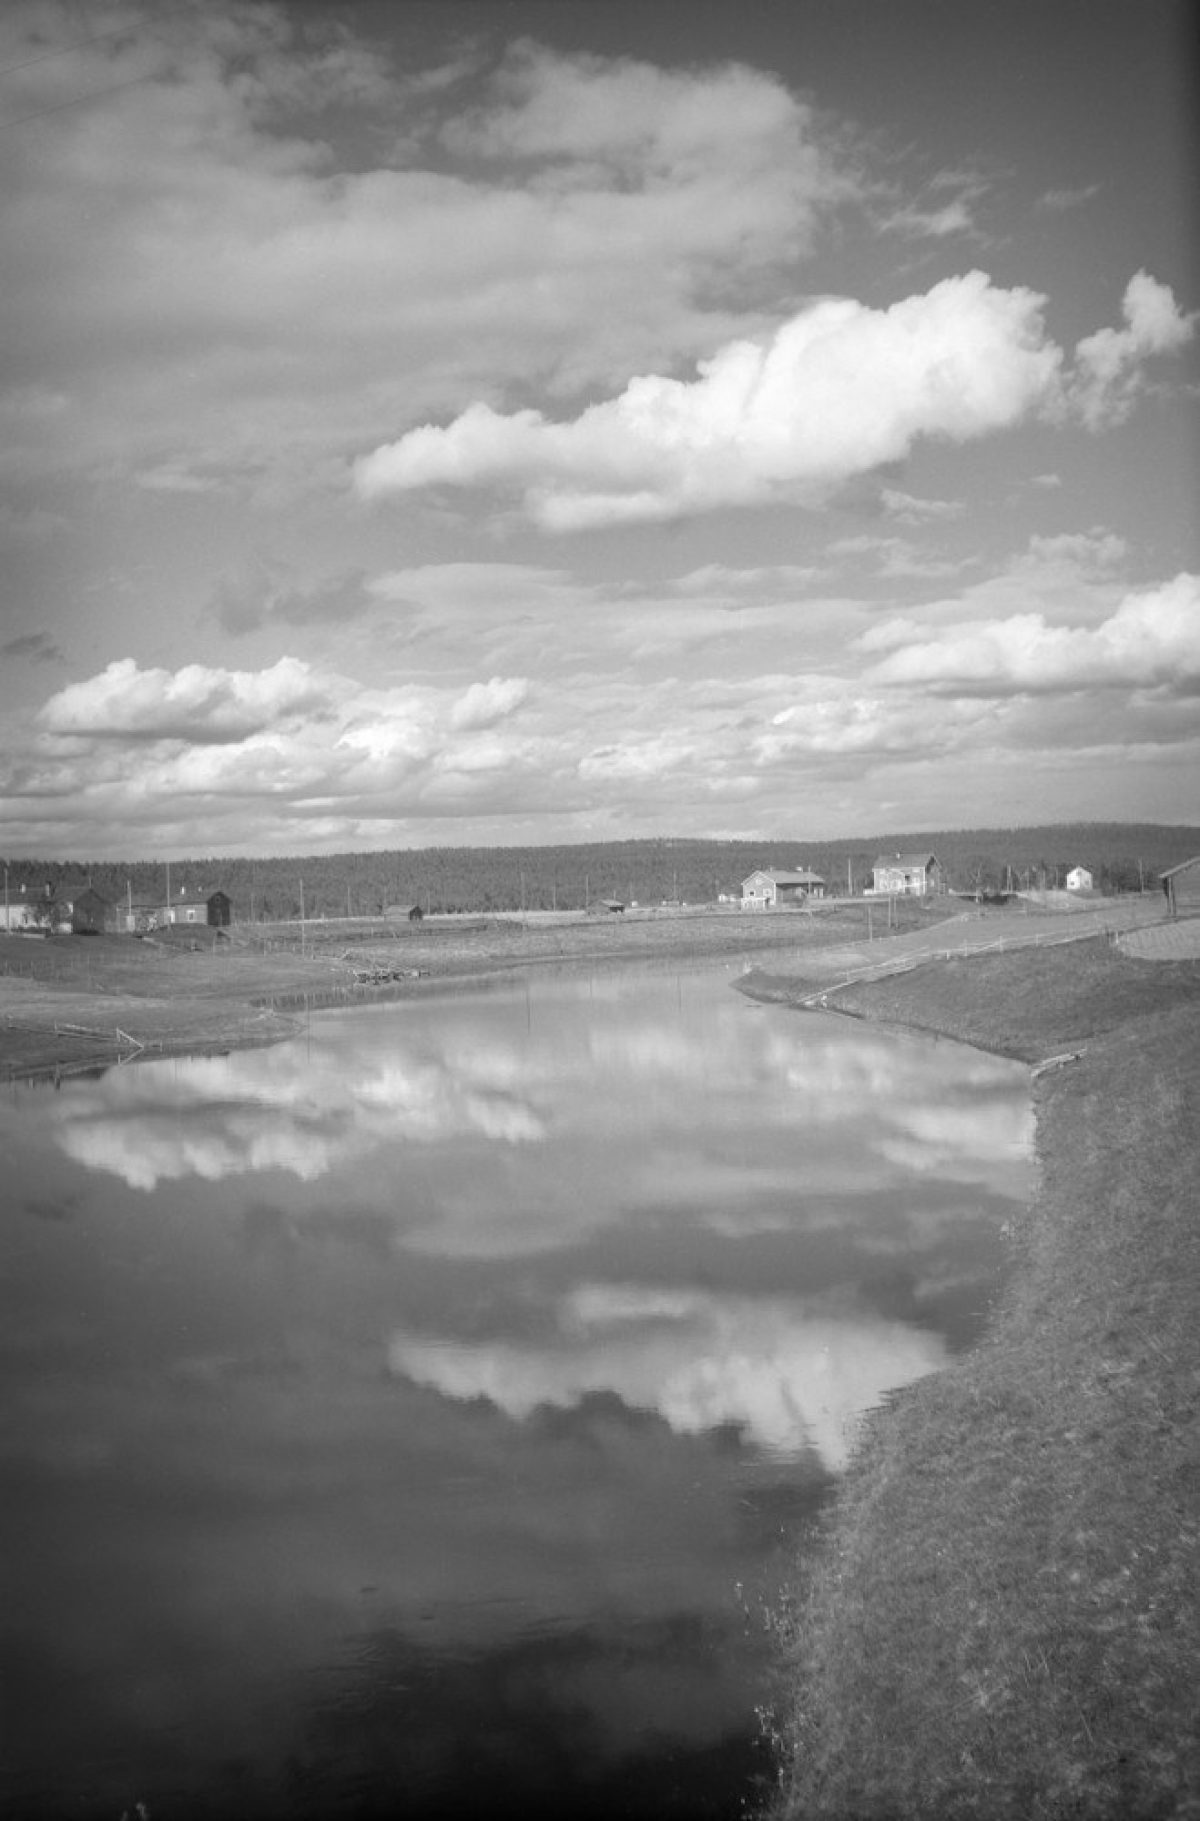 Clouds above the Rovaniemi rural commune, 20 June 1951. Photo: Matti Poutvaara, Historical Picture Collection, Finnish Heritage Agency